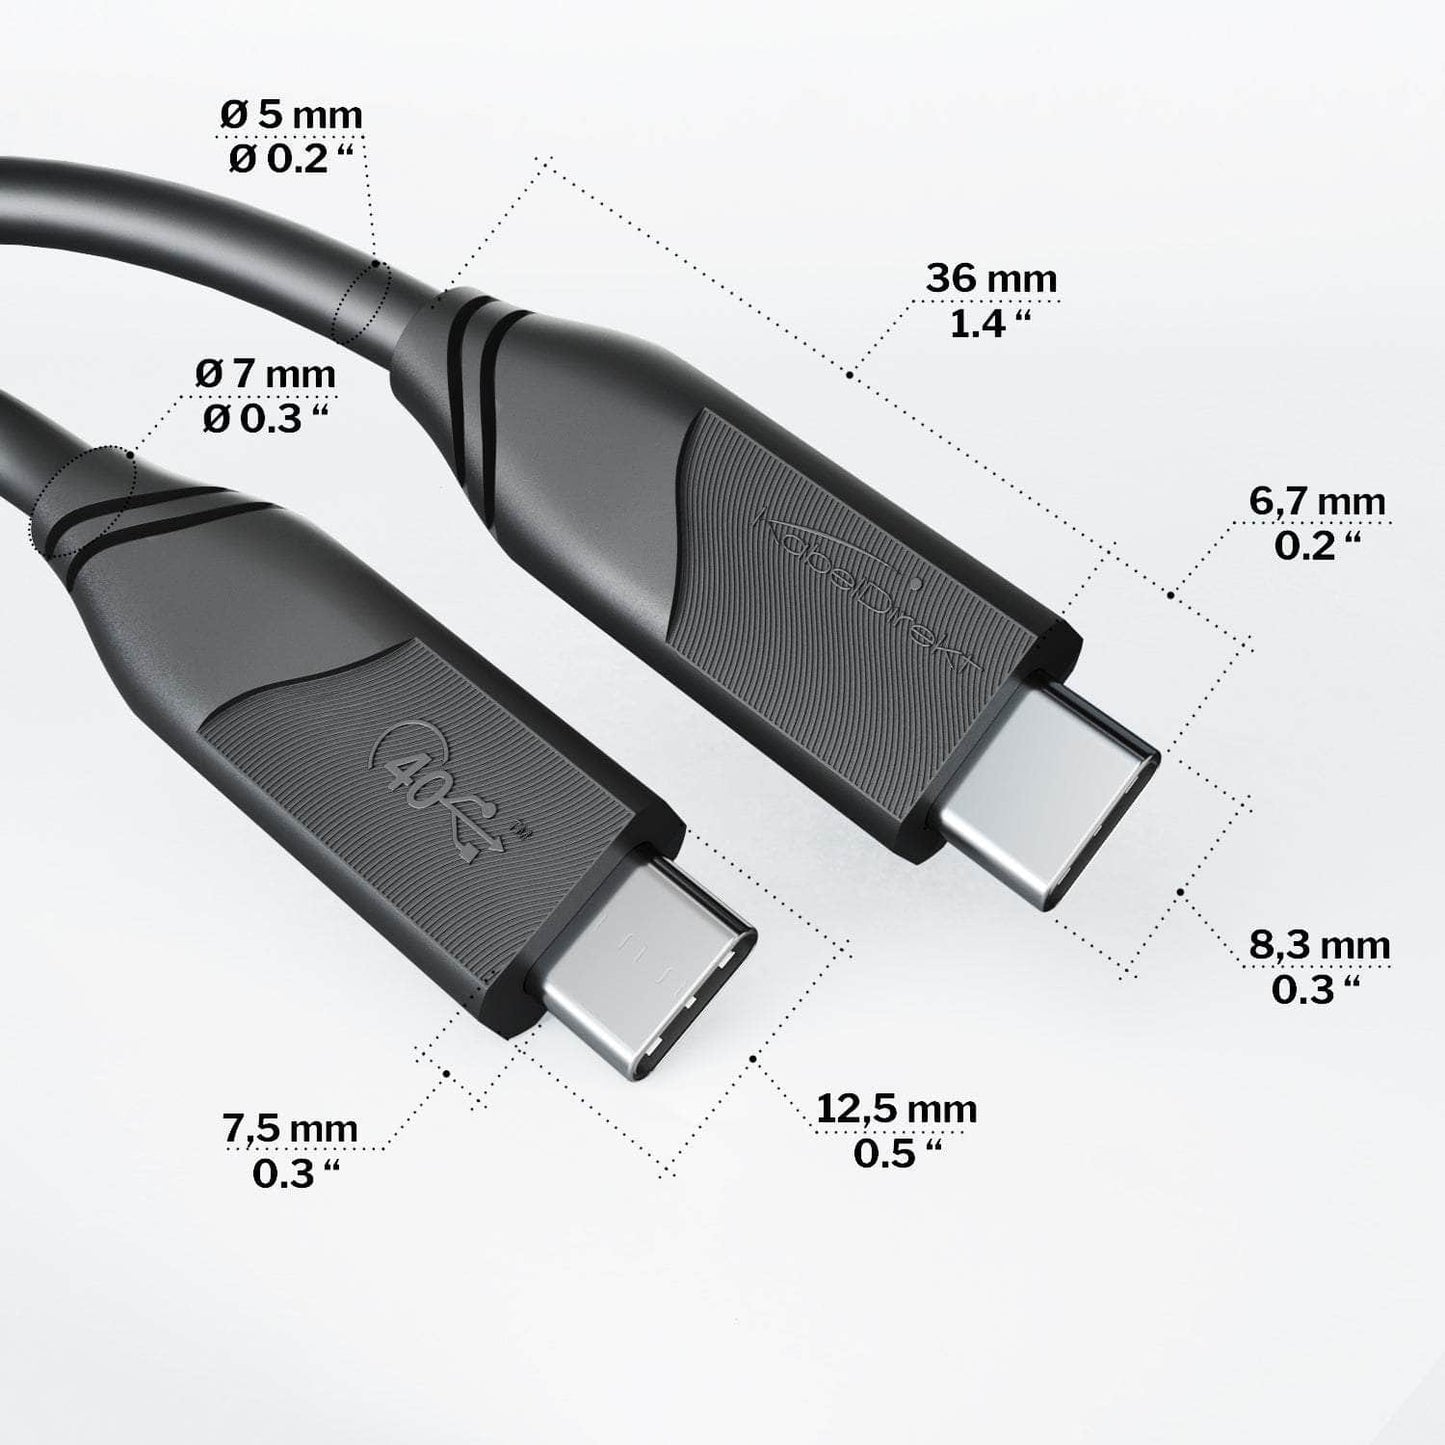 USB-C cable - USB 4.0, Power Delivery 3, Thunderbolt 4, black - 1m